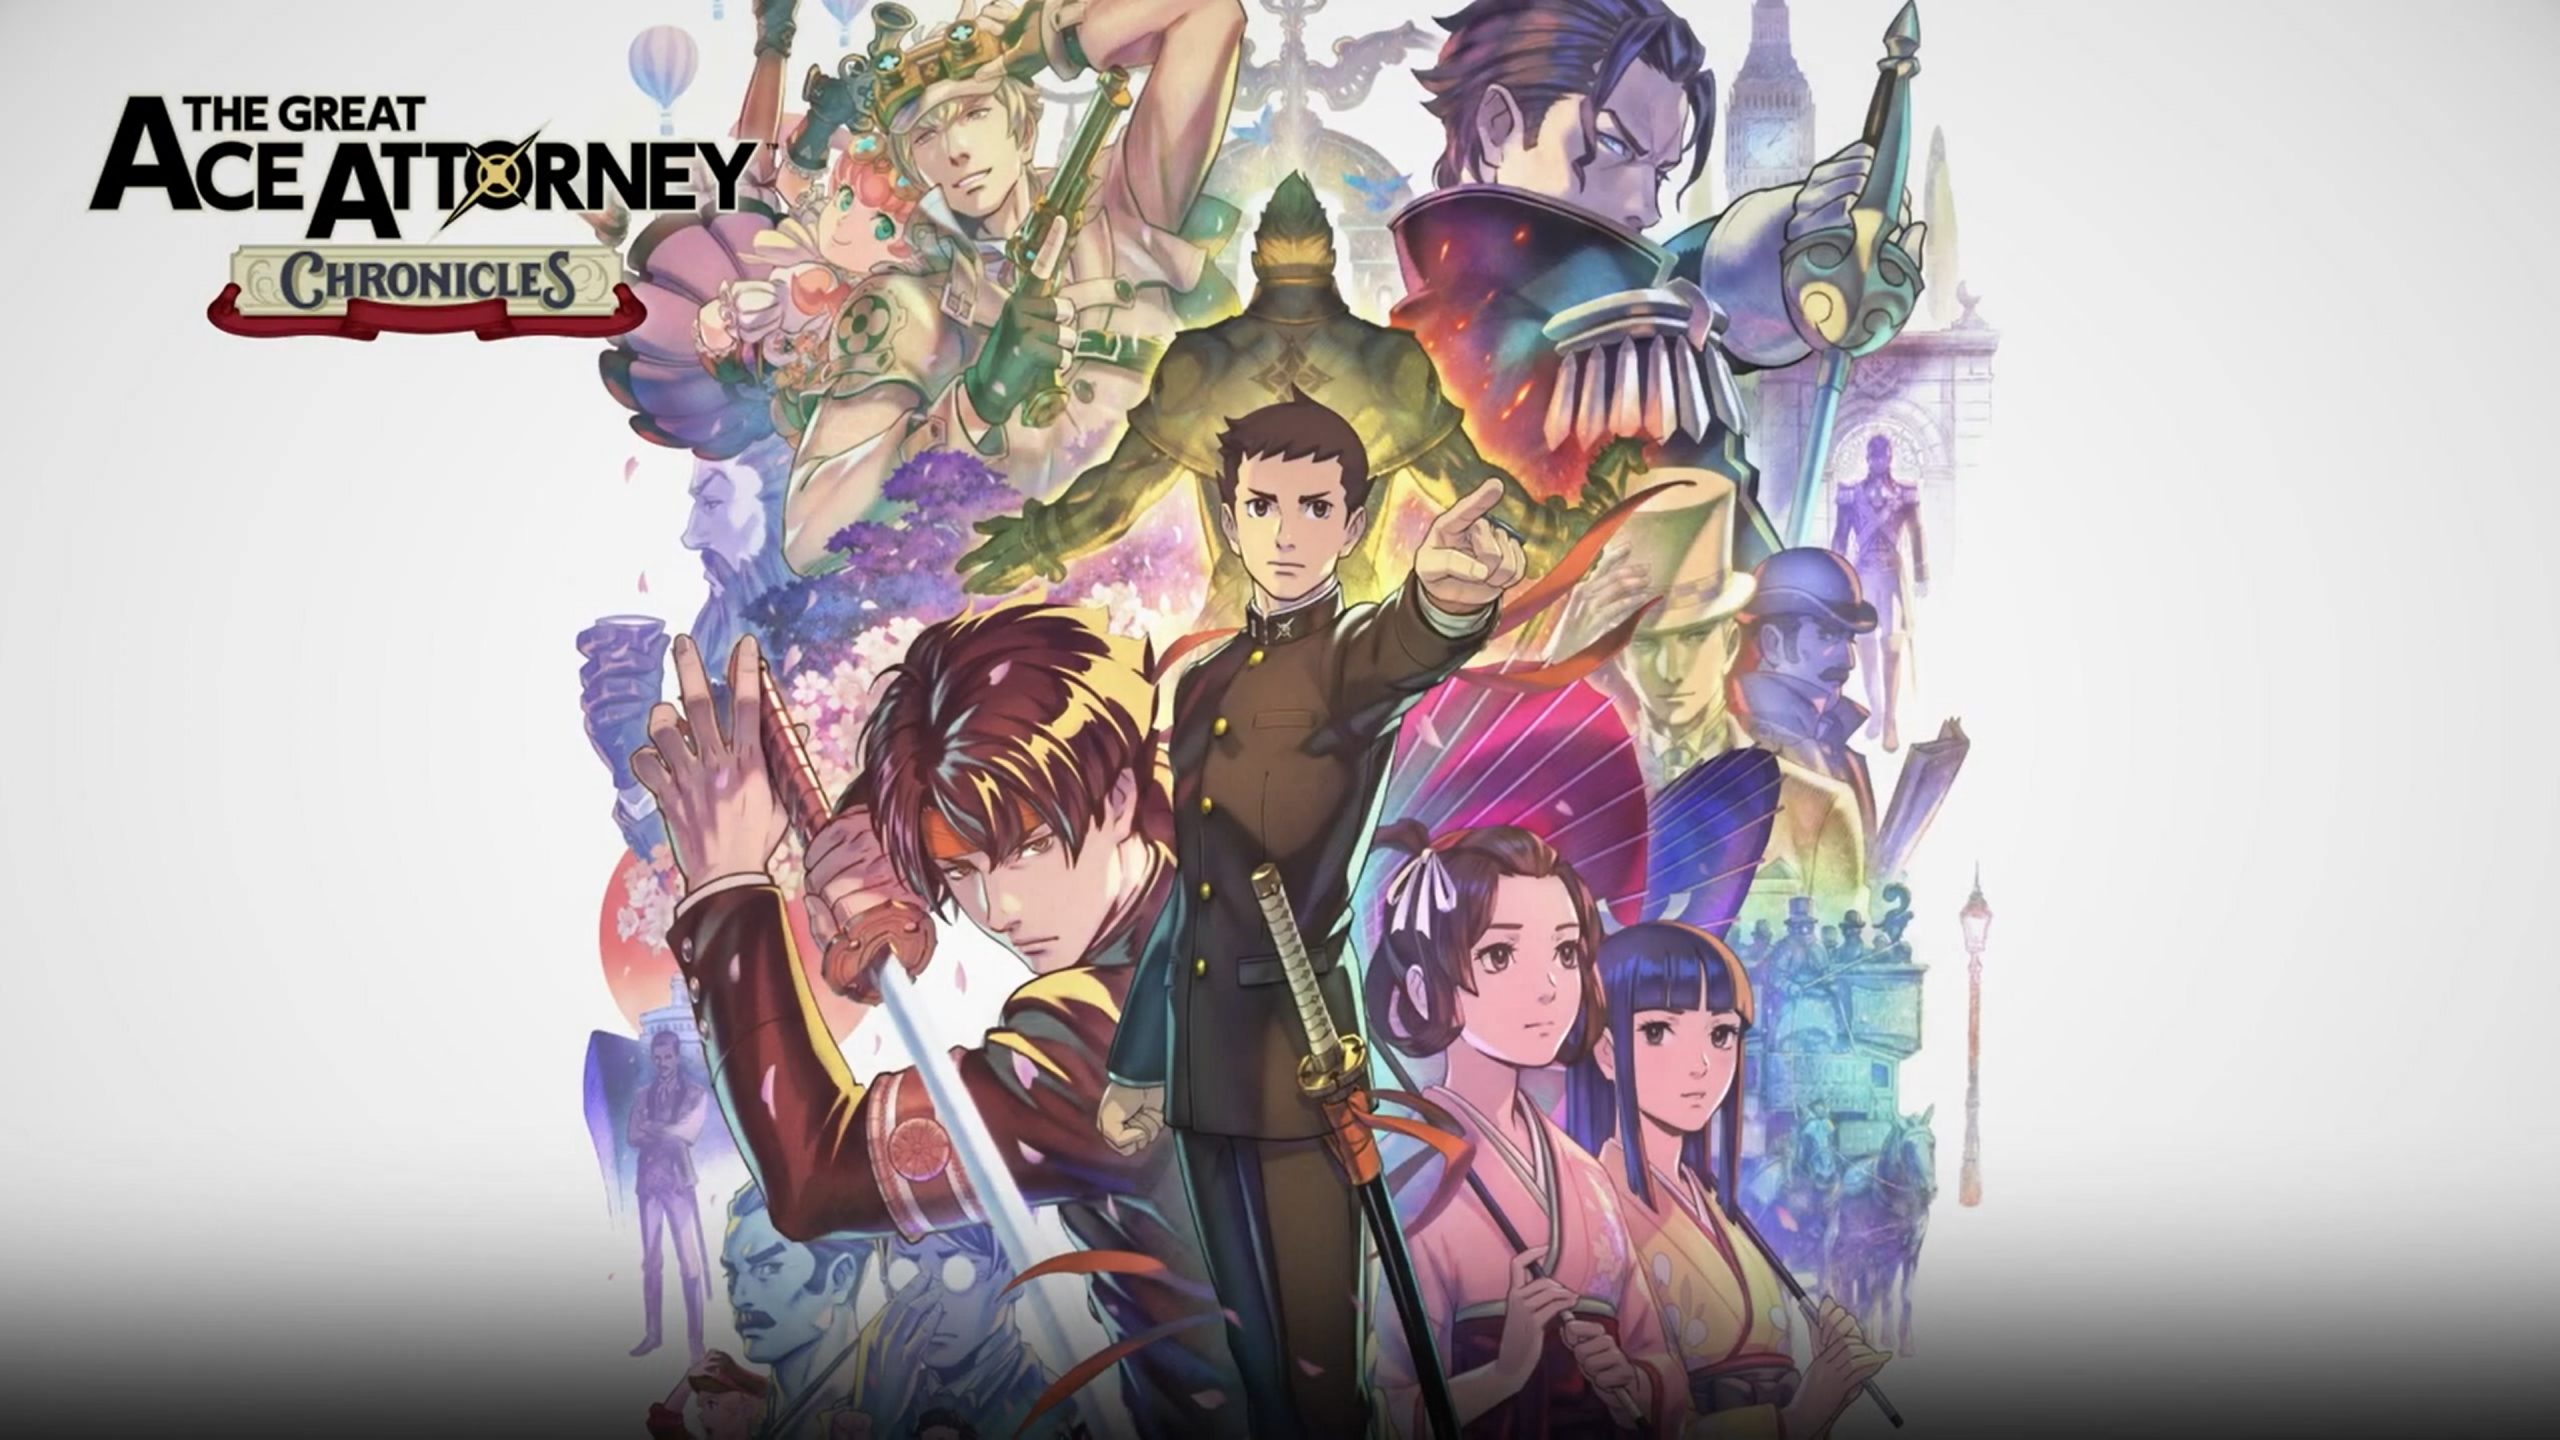 The Great Ace Attorney: Chronicles